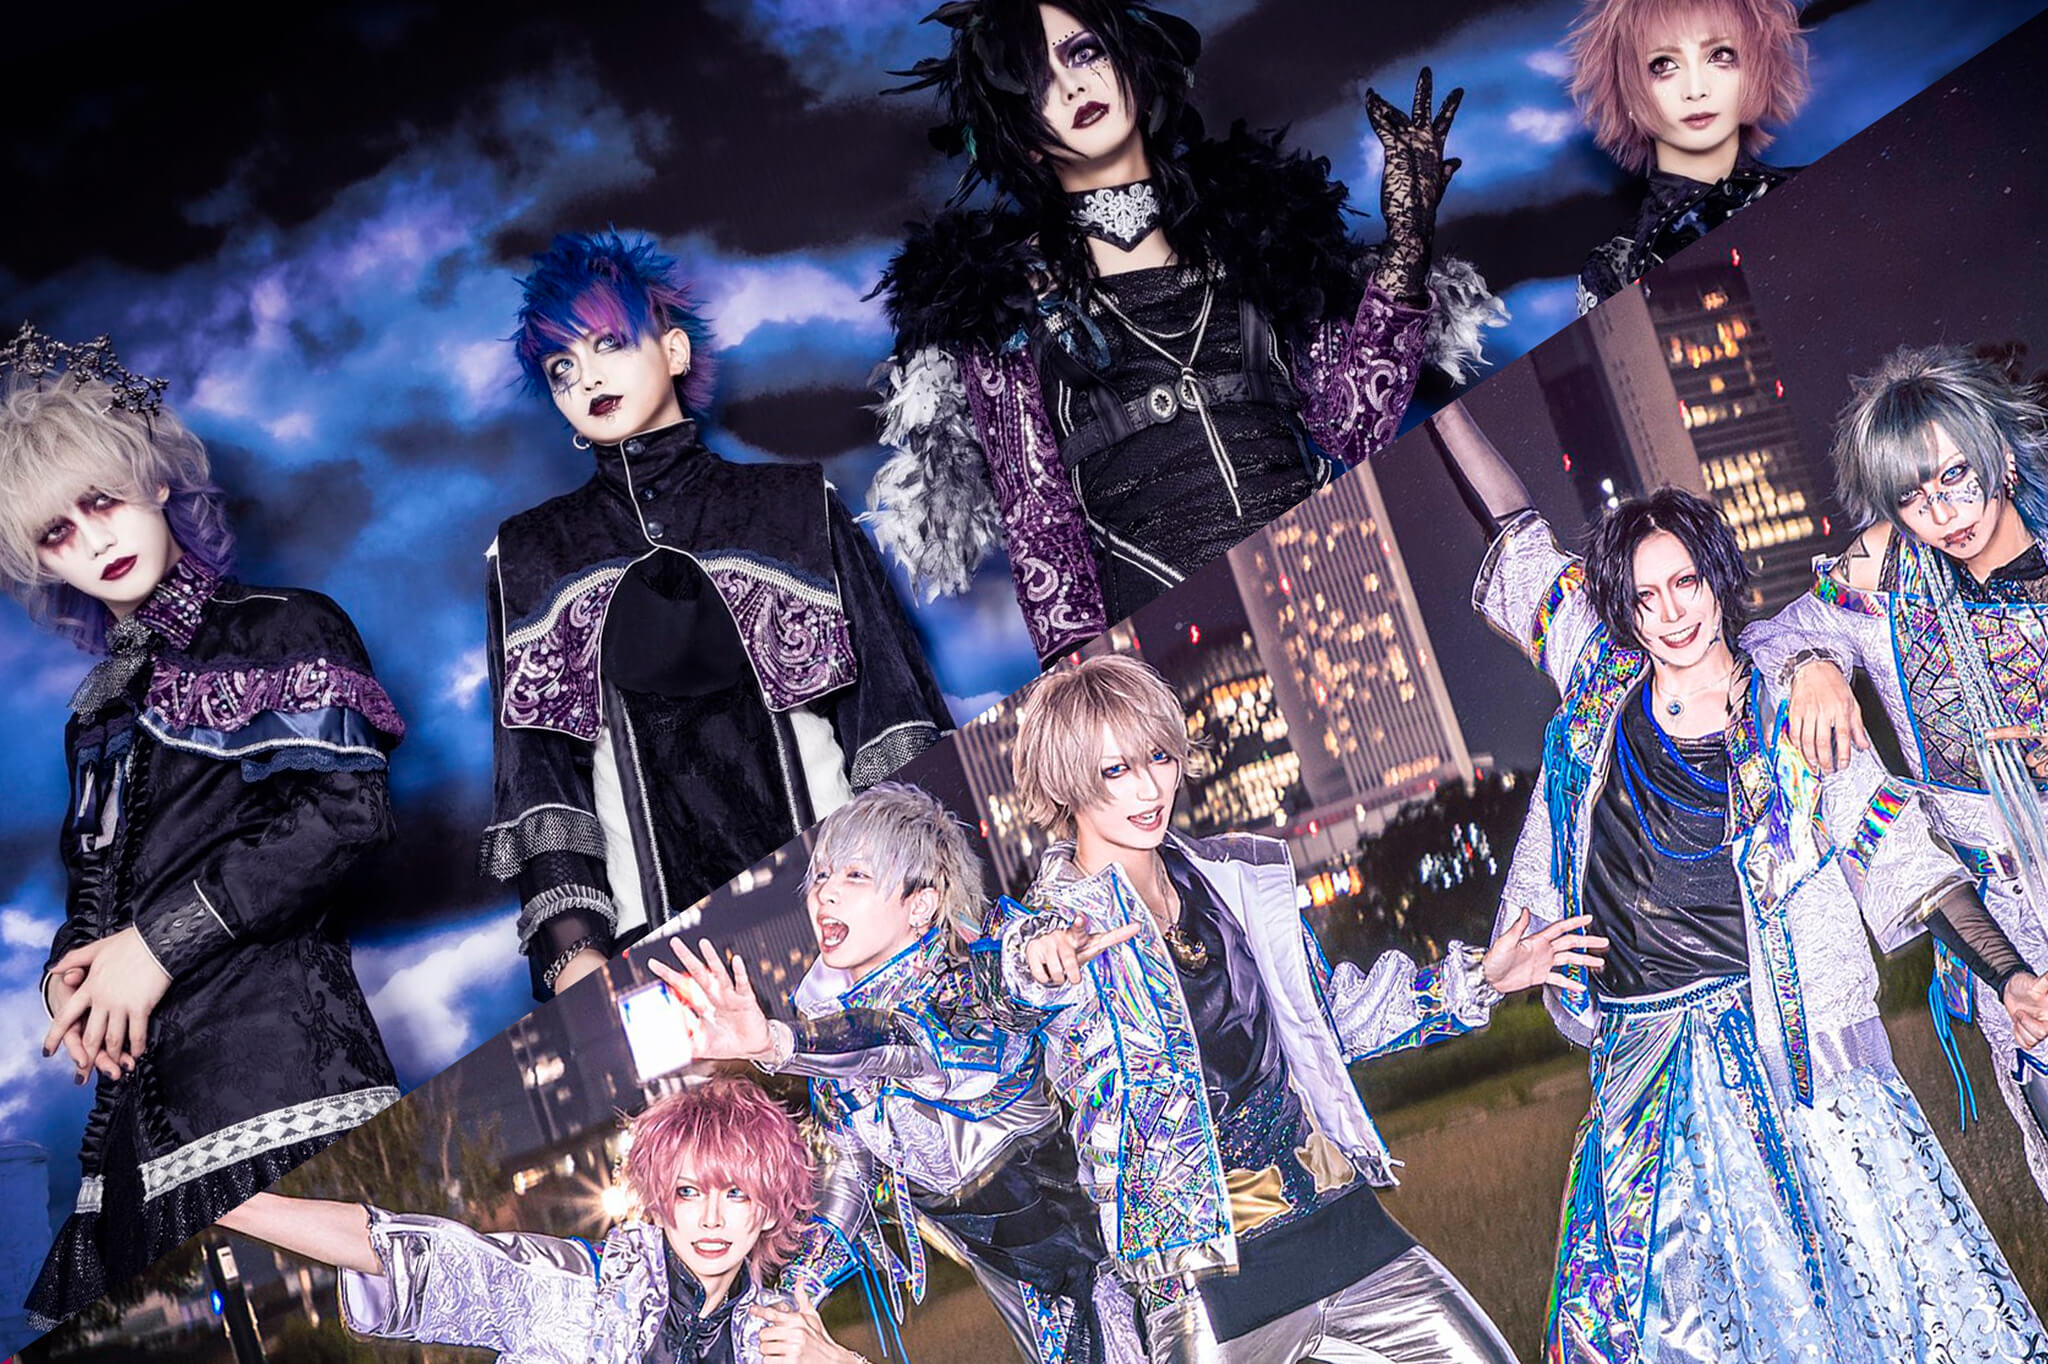 ARLEQUIN events and Like an Edison collaboration